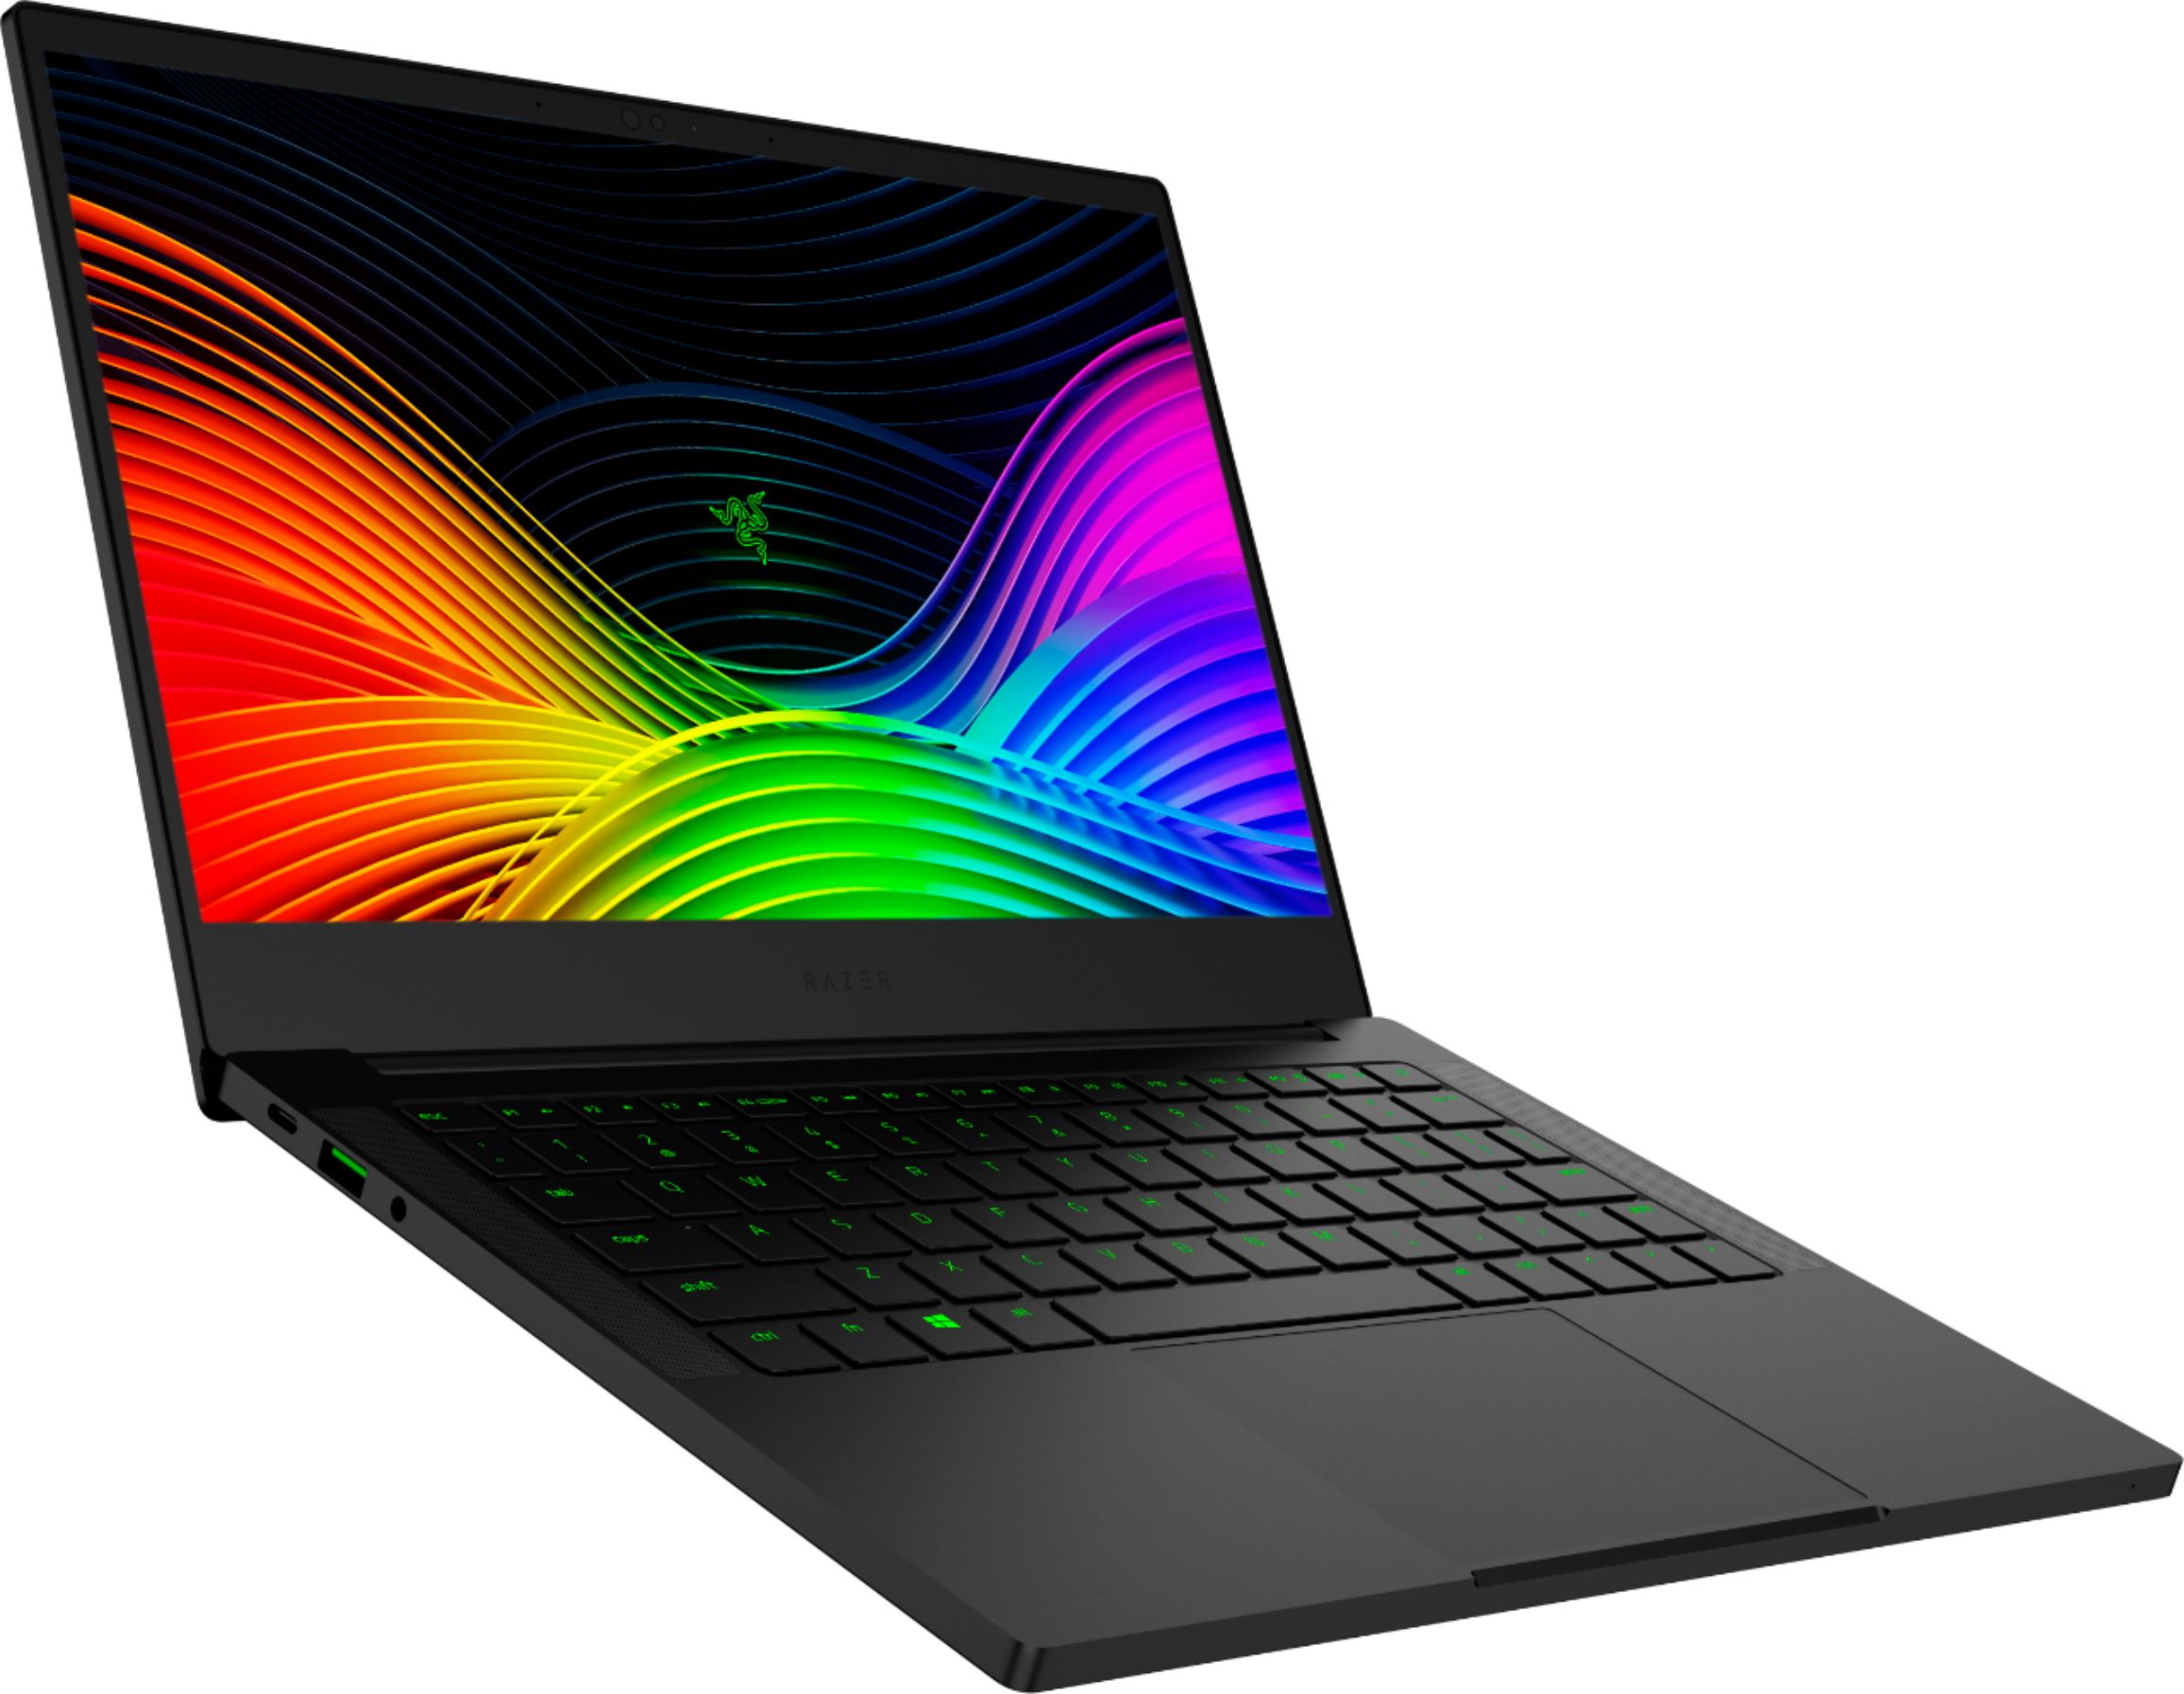 Angle View: Razer - Geek Squad Certified Refurbished 13.3" 4K Touch-Screen Gaming Laptop - Core i7 - 16GB - GeForce GTX 1650 - 512GB SSD - Black